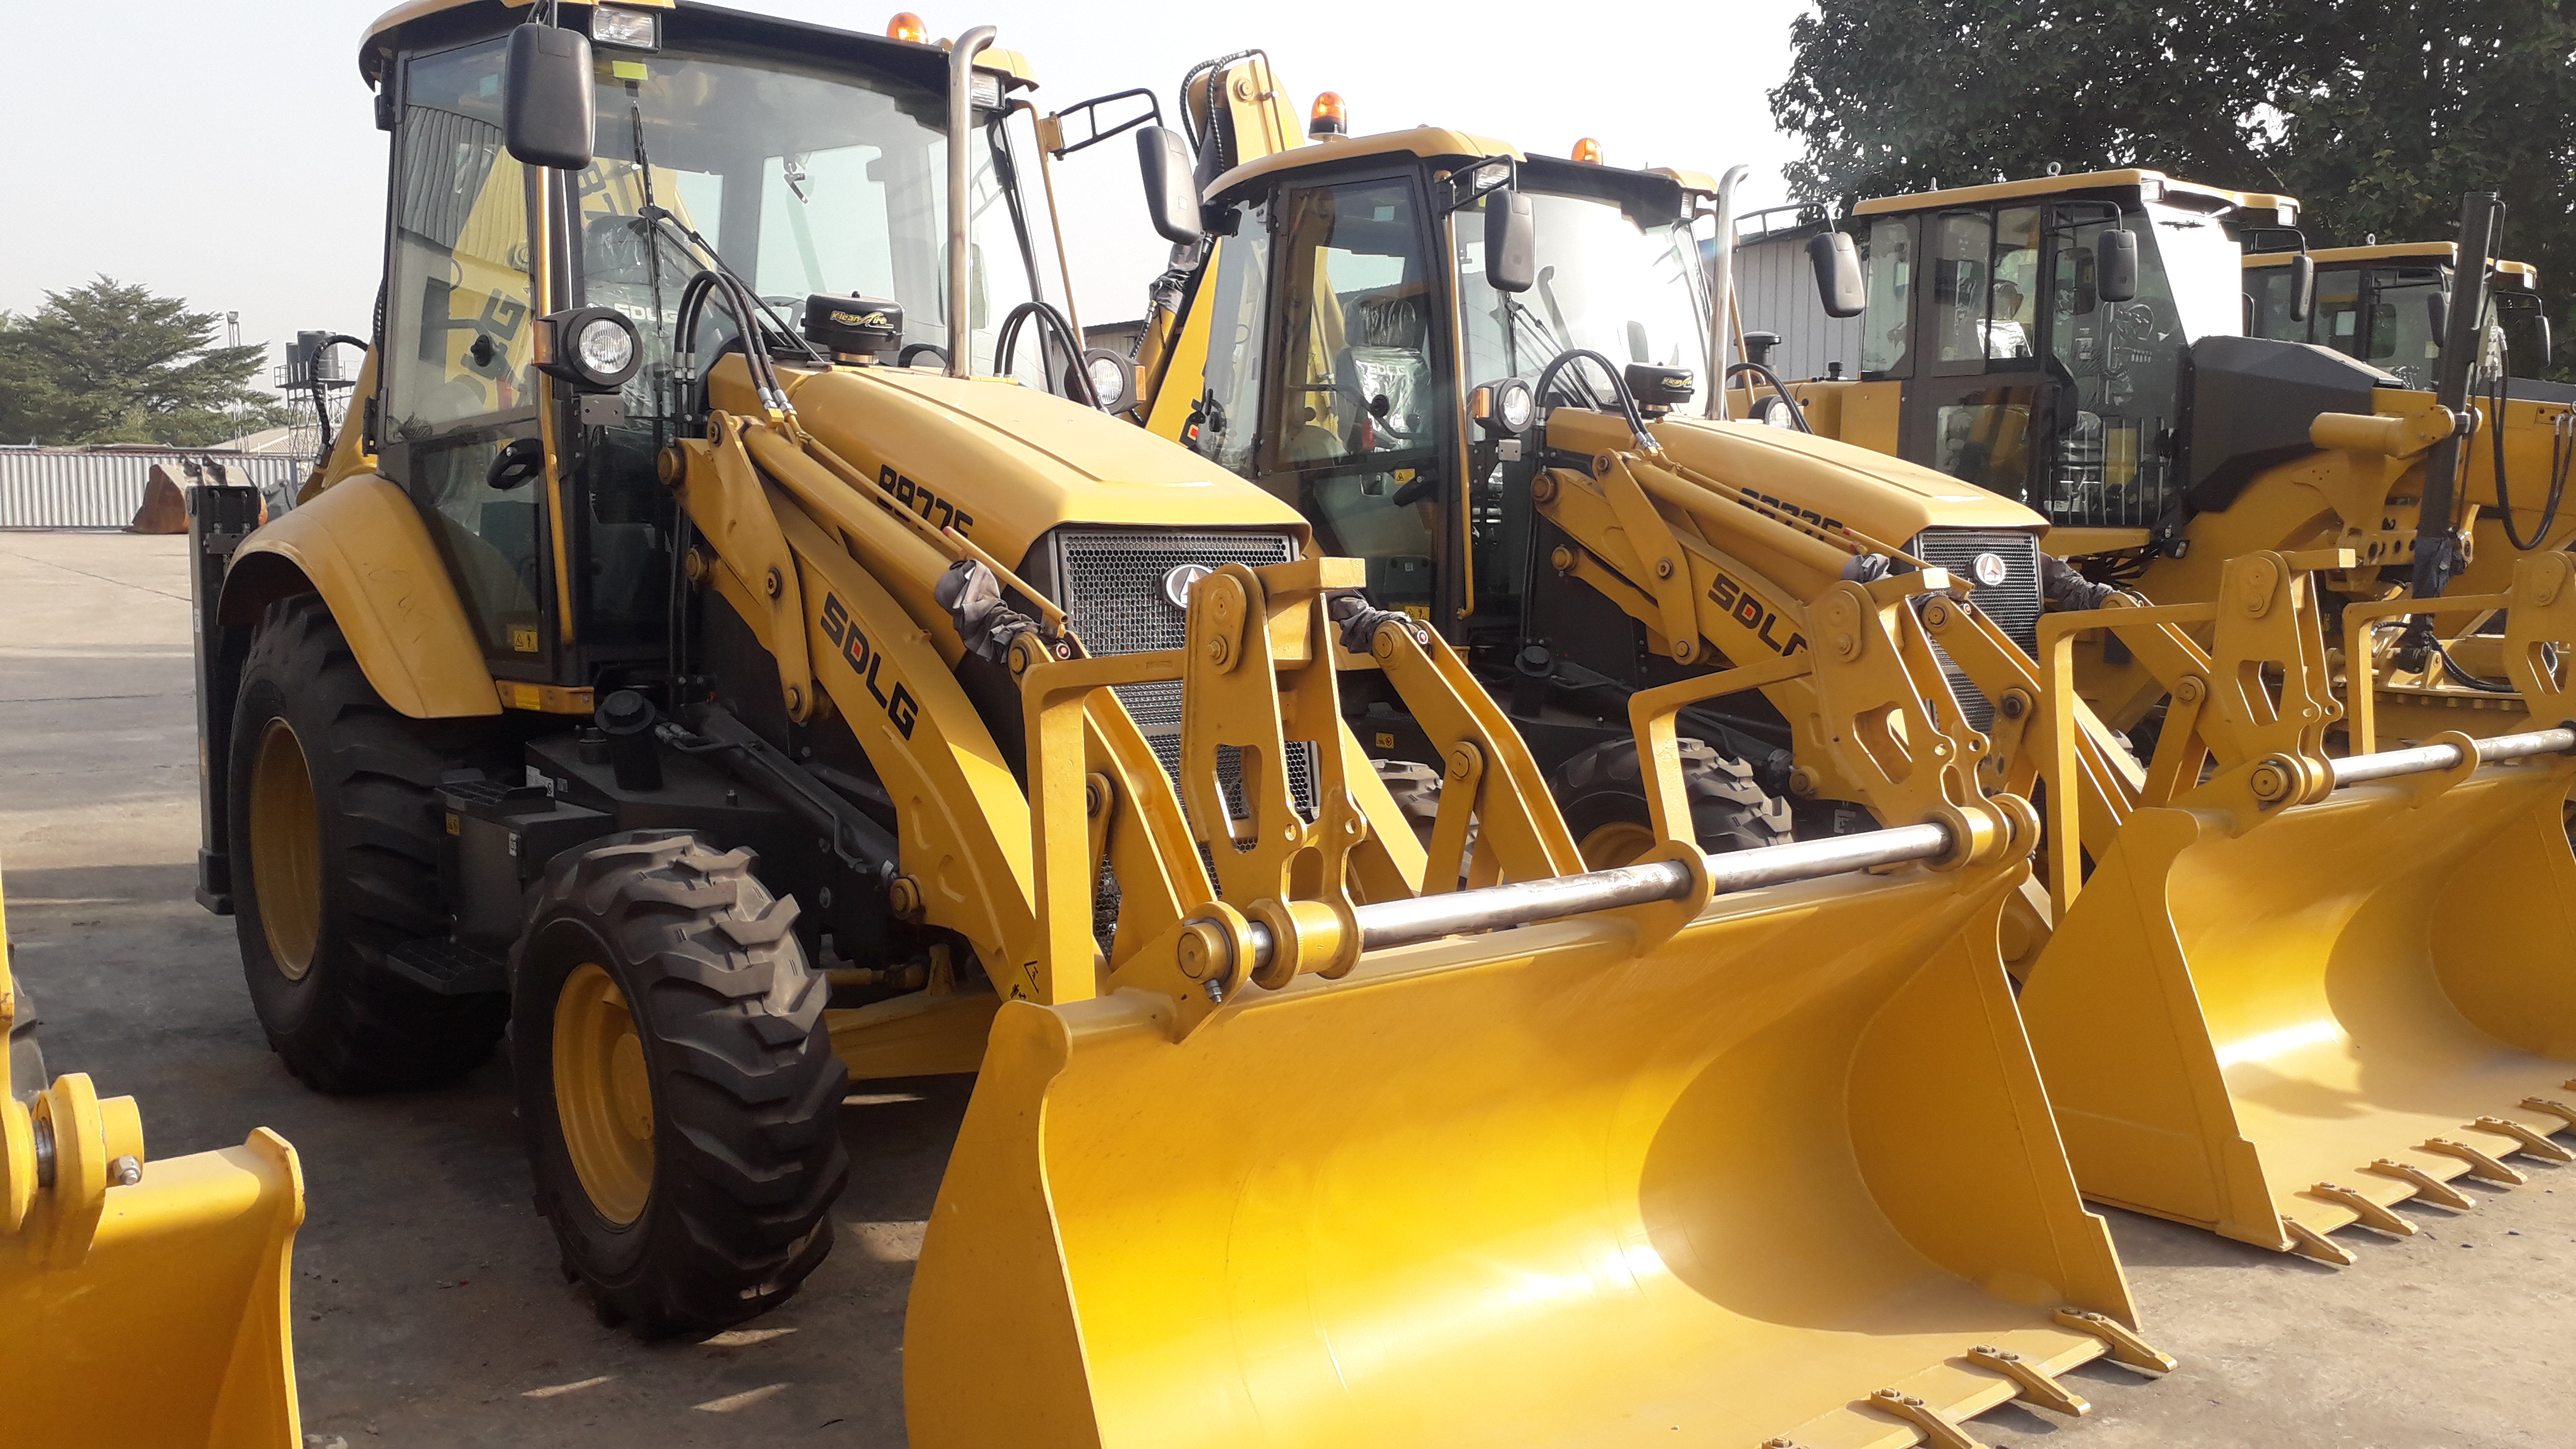 SDLG B877BACHOE LOADER is available at Efritin